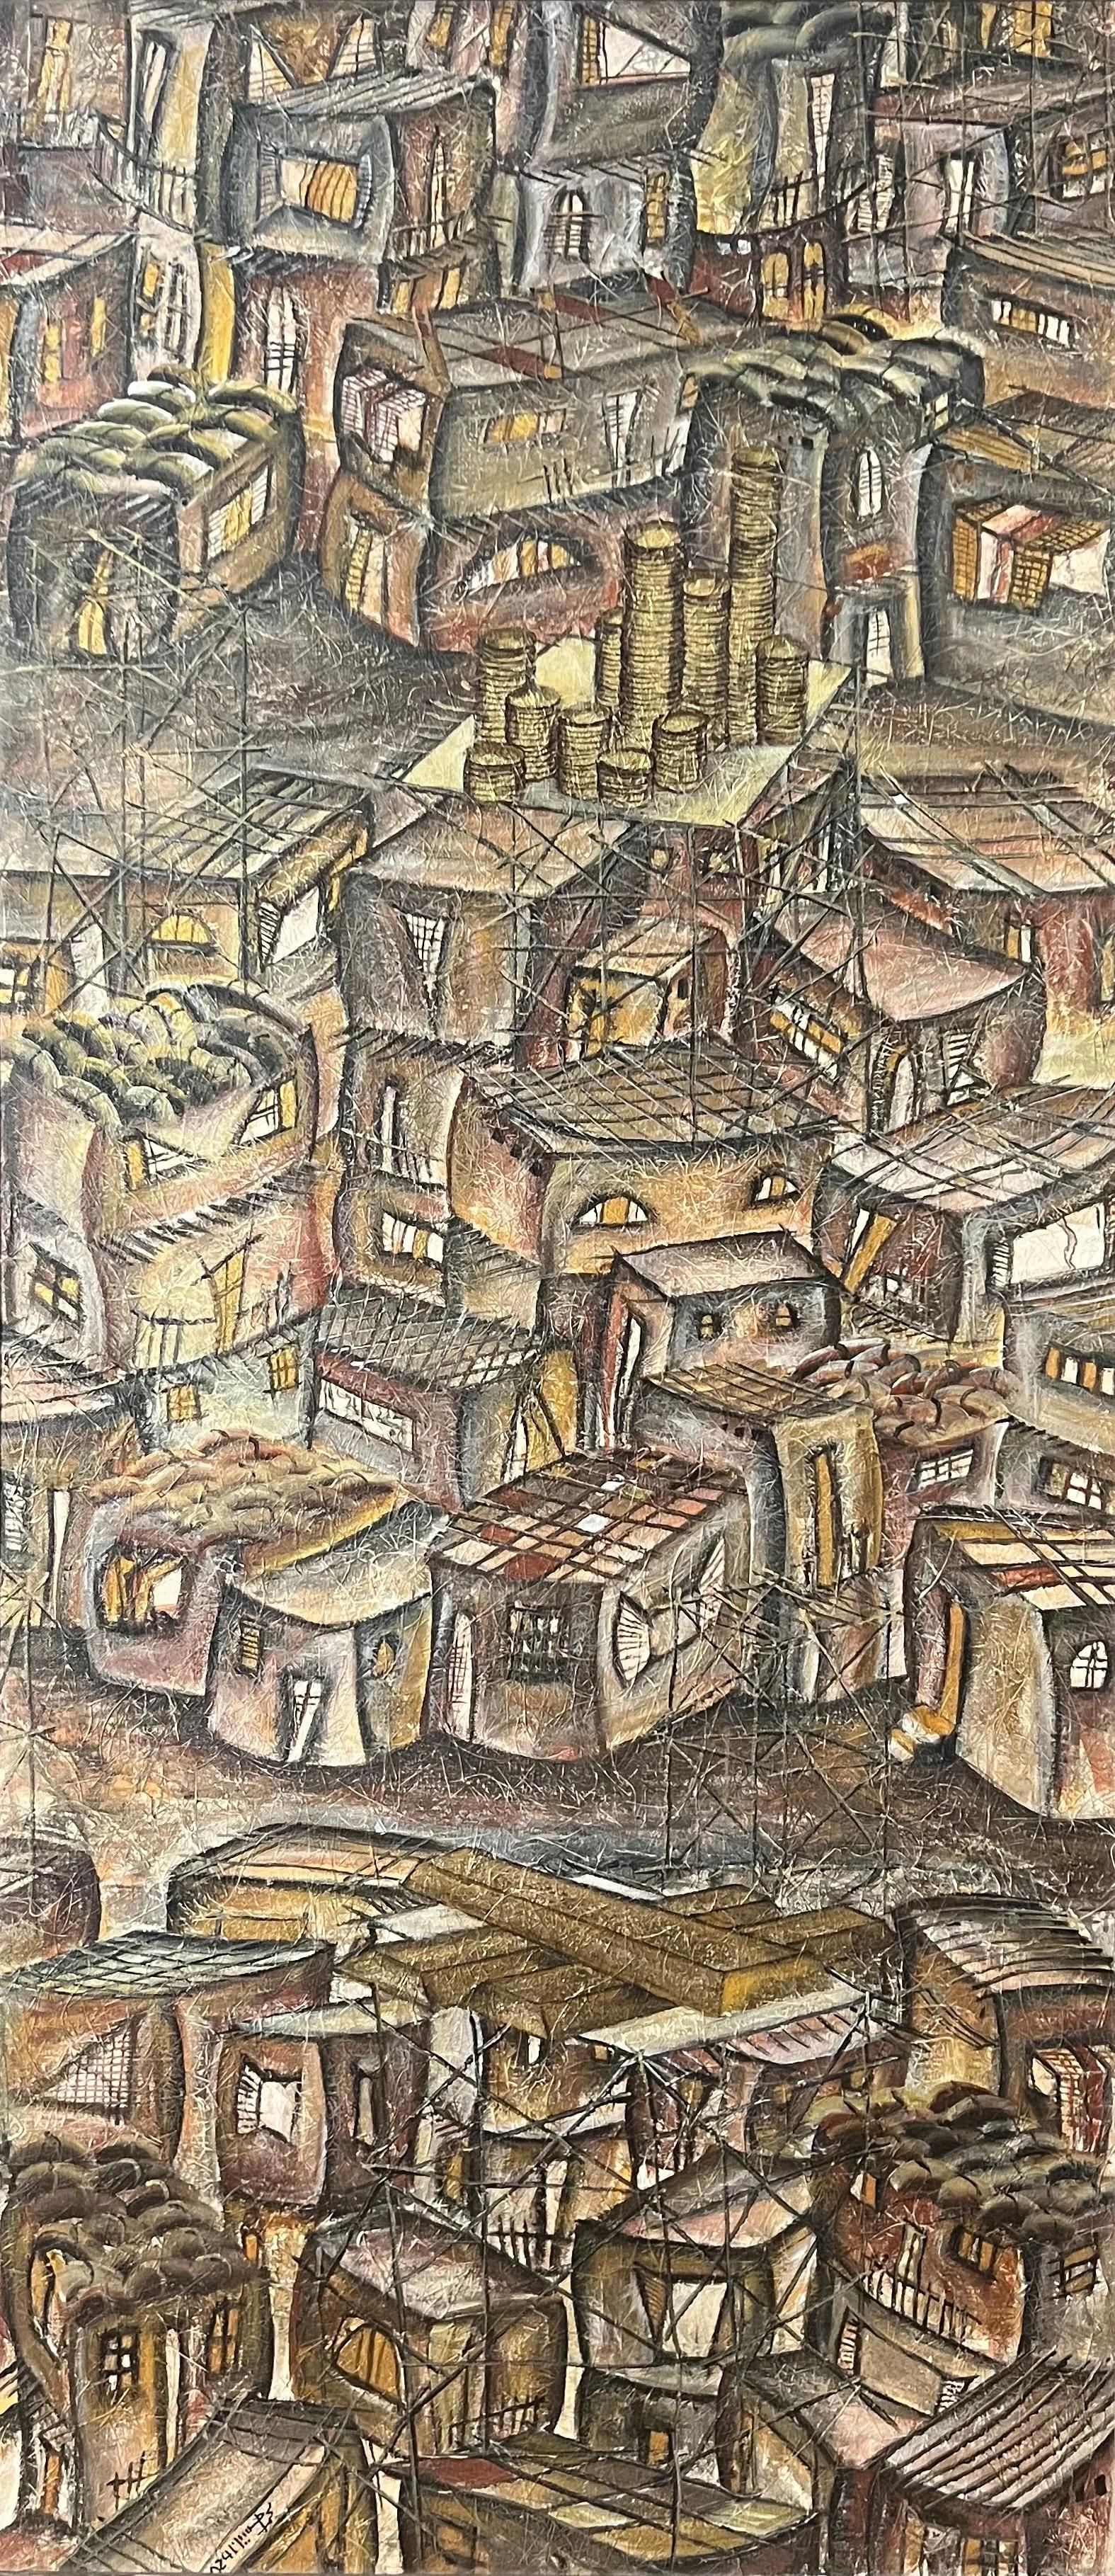 MOHAMED HUSSEIN Figurative Painting - "Favela Triptych I" Painting 71" x 31.5" inch by Mohamed Hussein